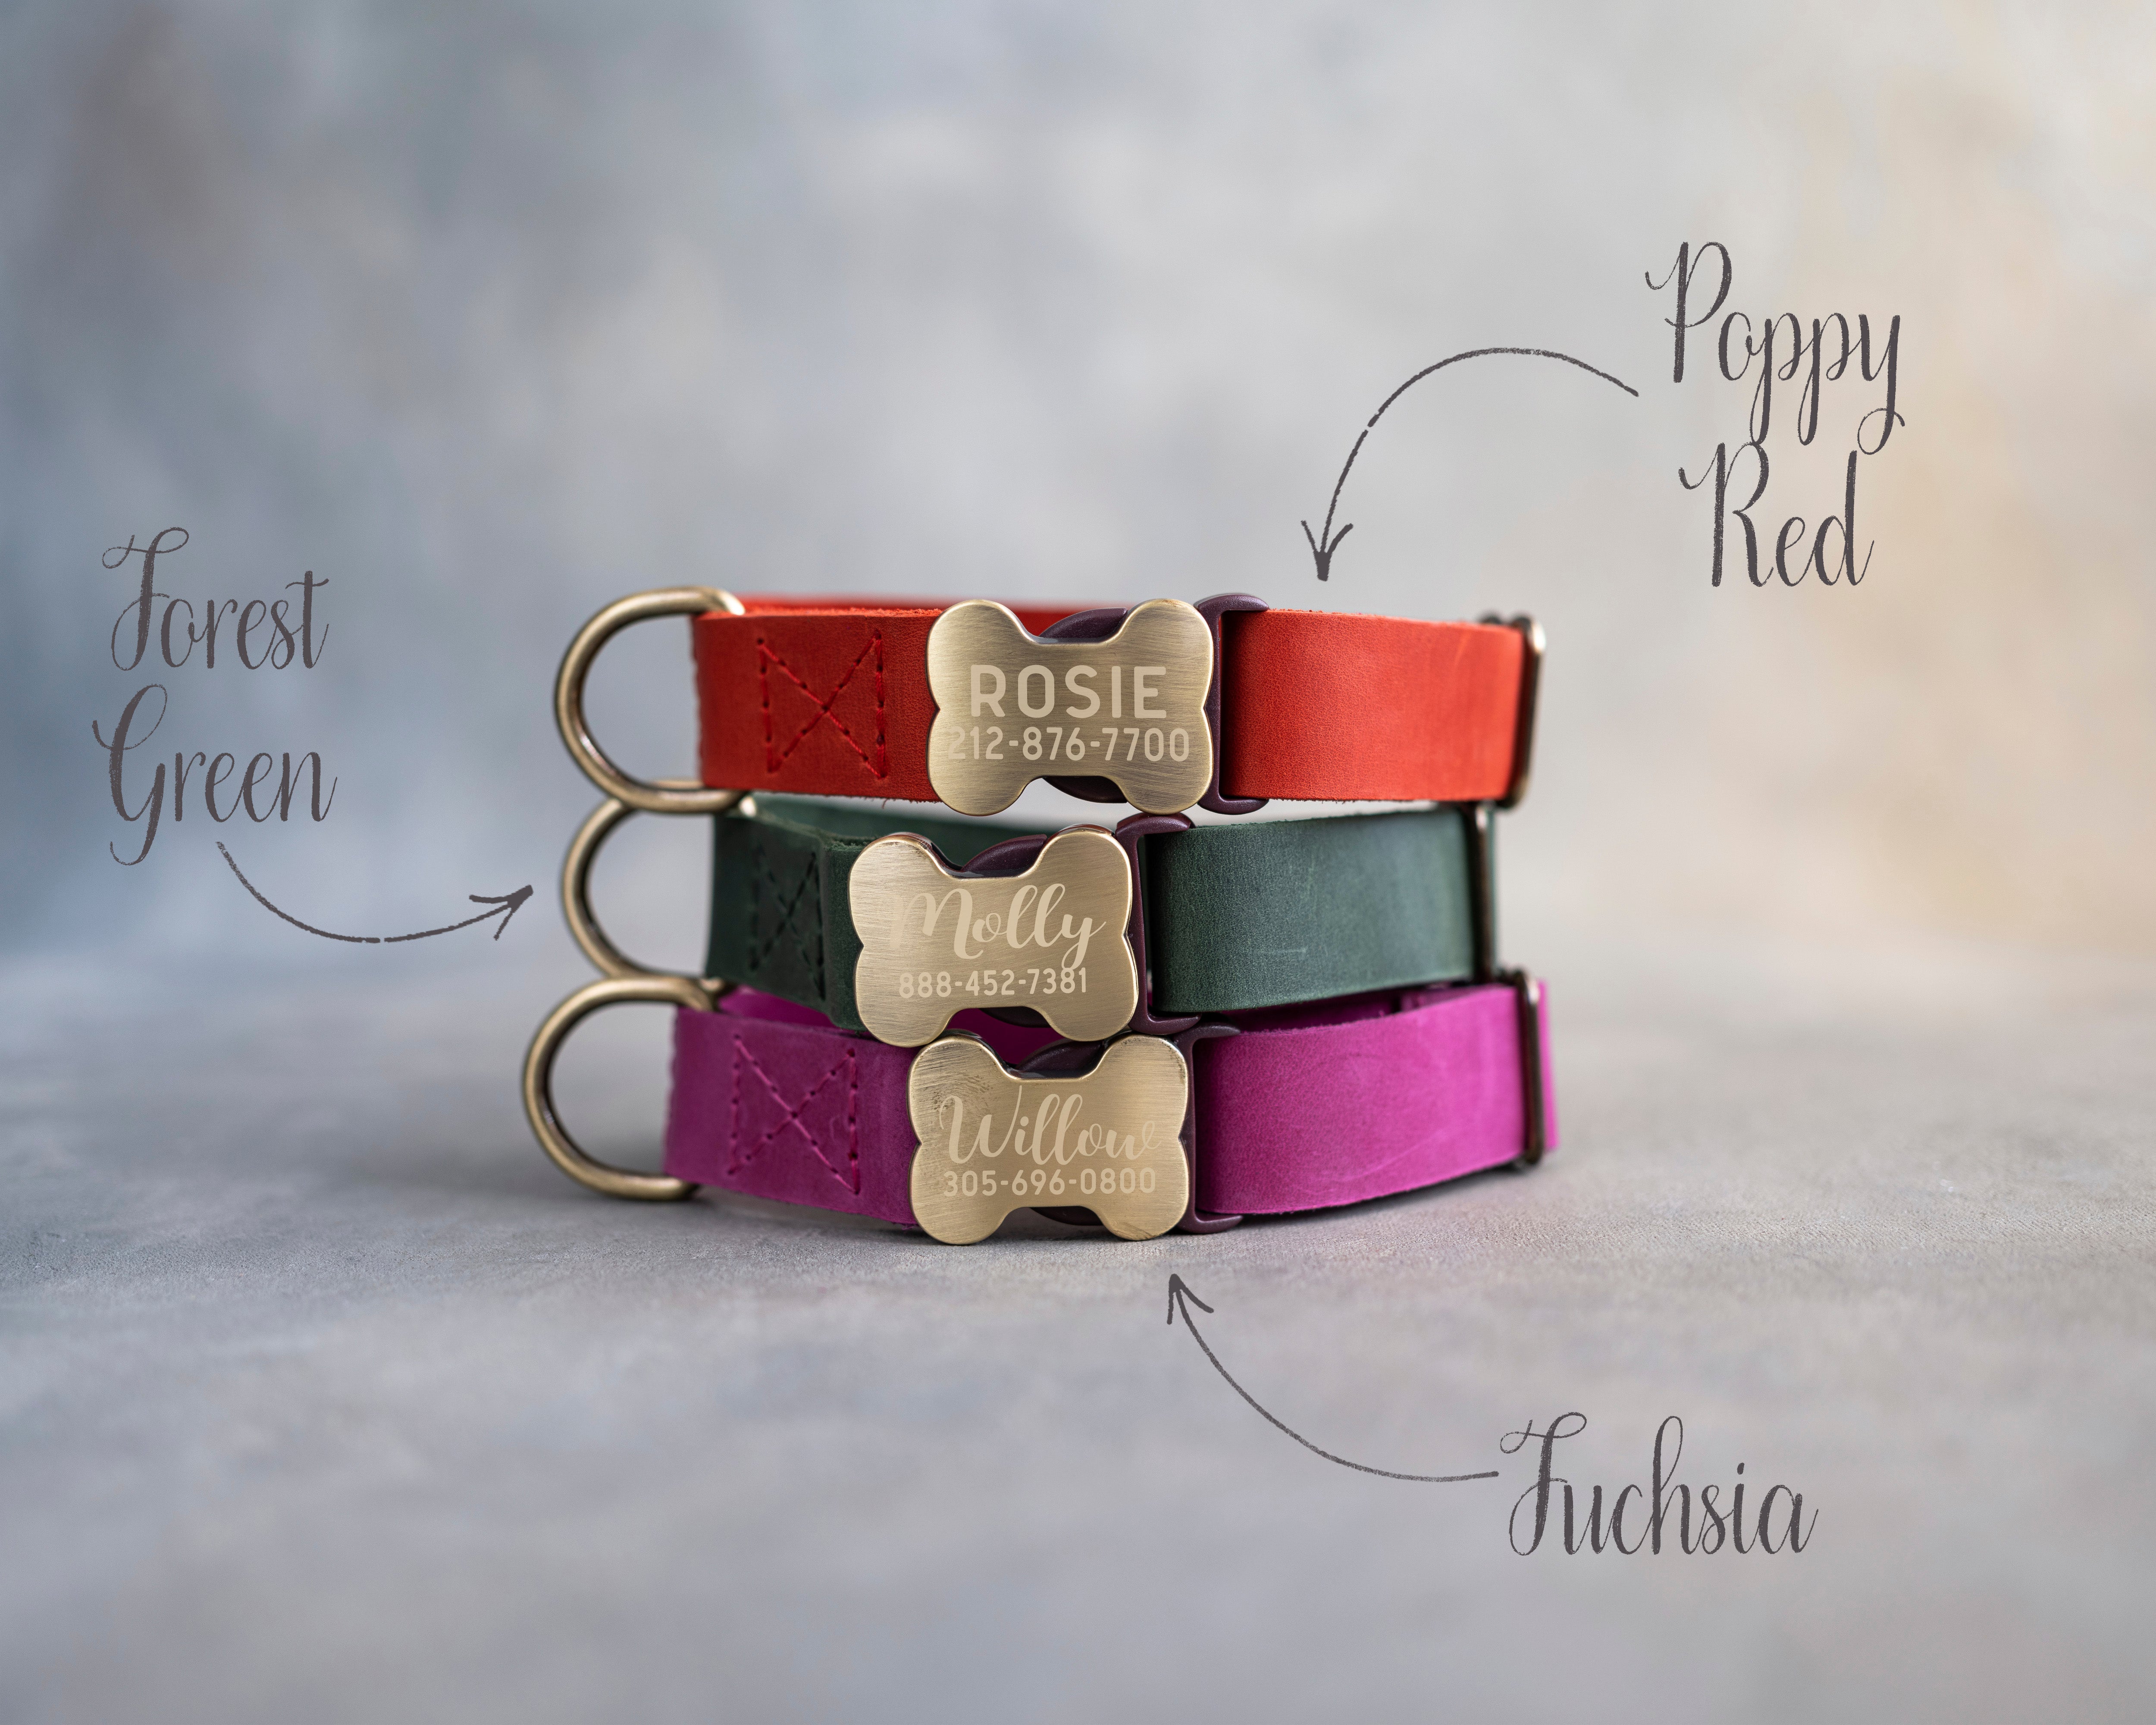 Personalized leather dog collar